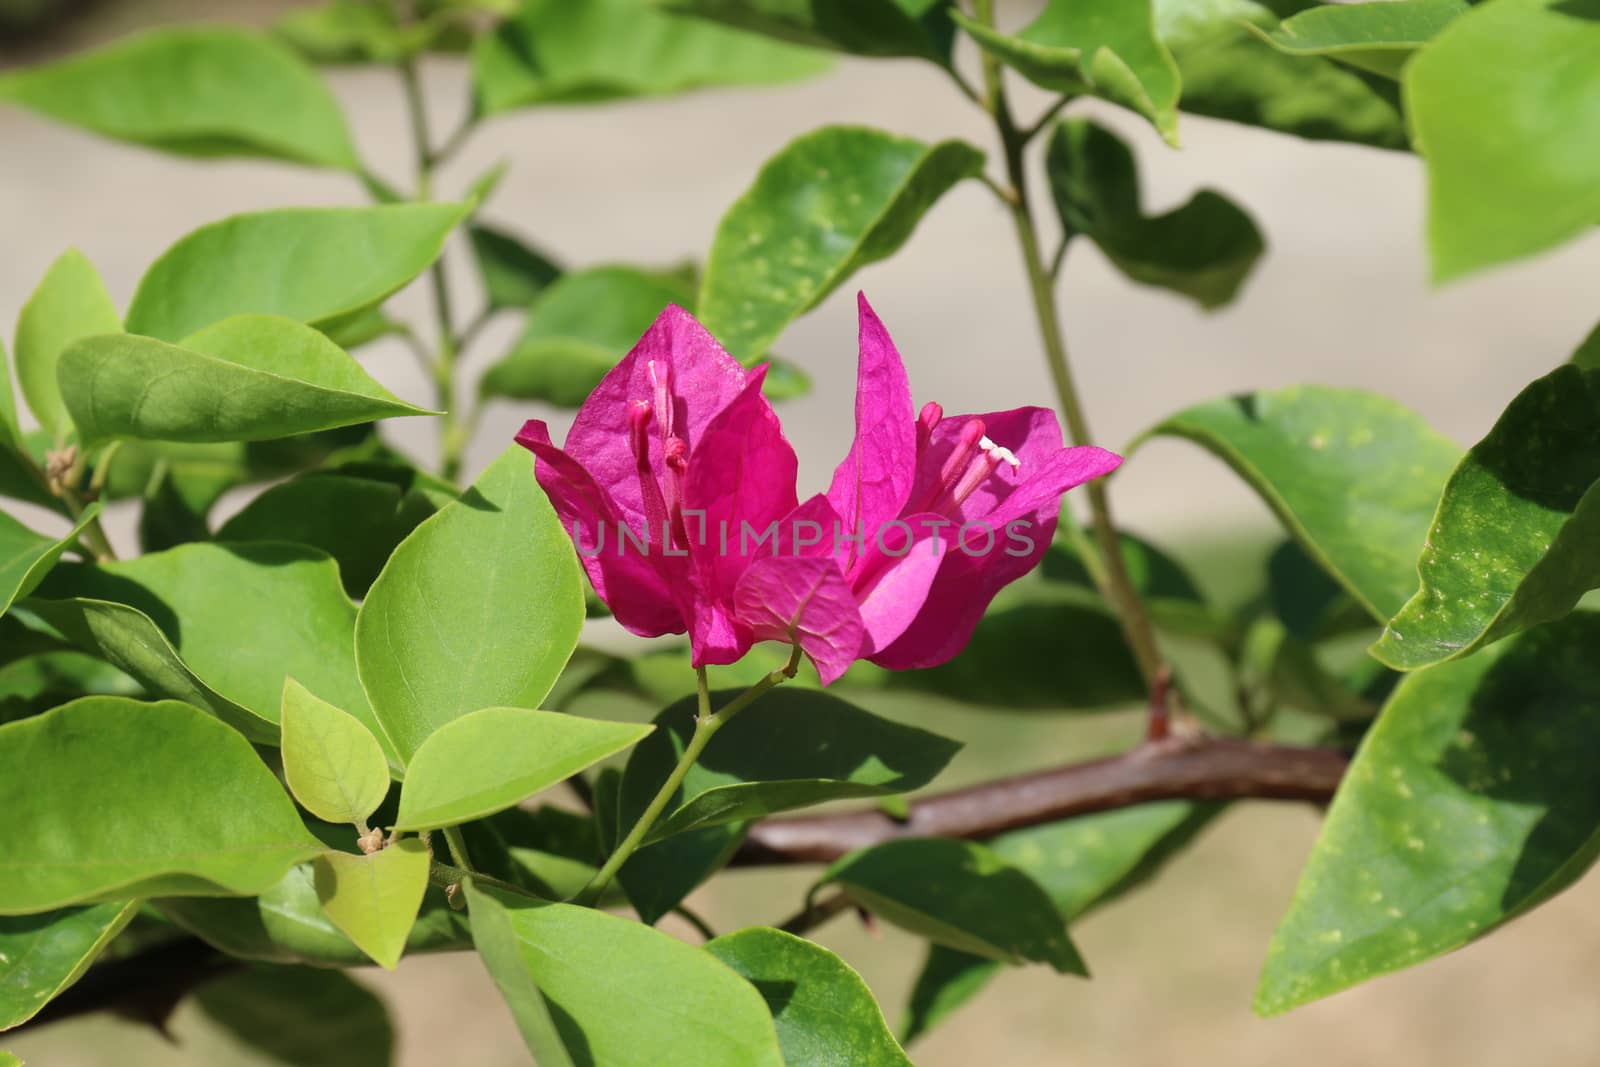 Purple bougainvillea flower on daylight, Panicle Bunch Fragrant pink and purple, flower with blurred background